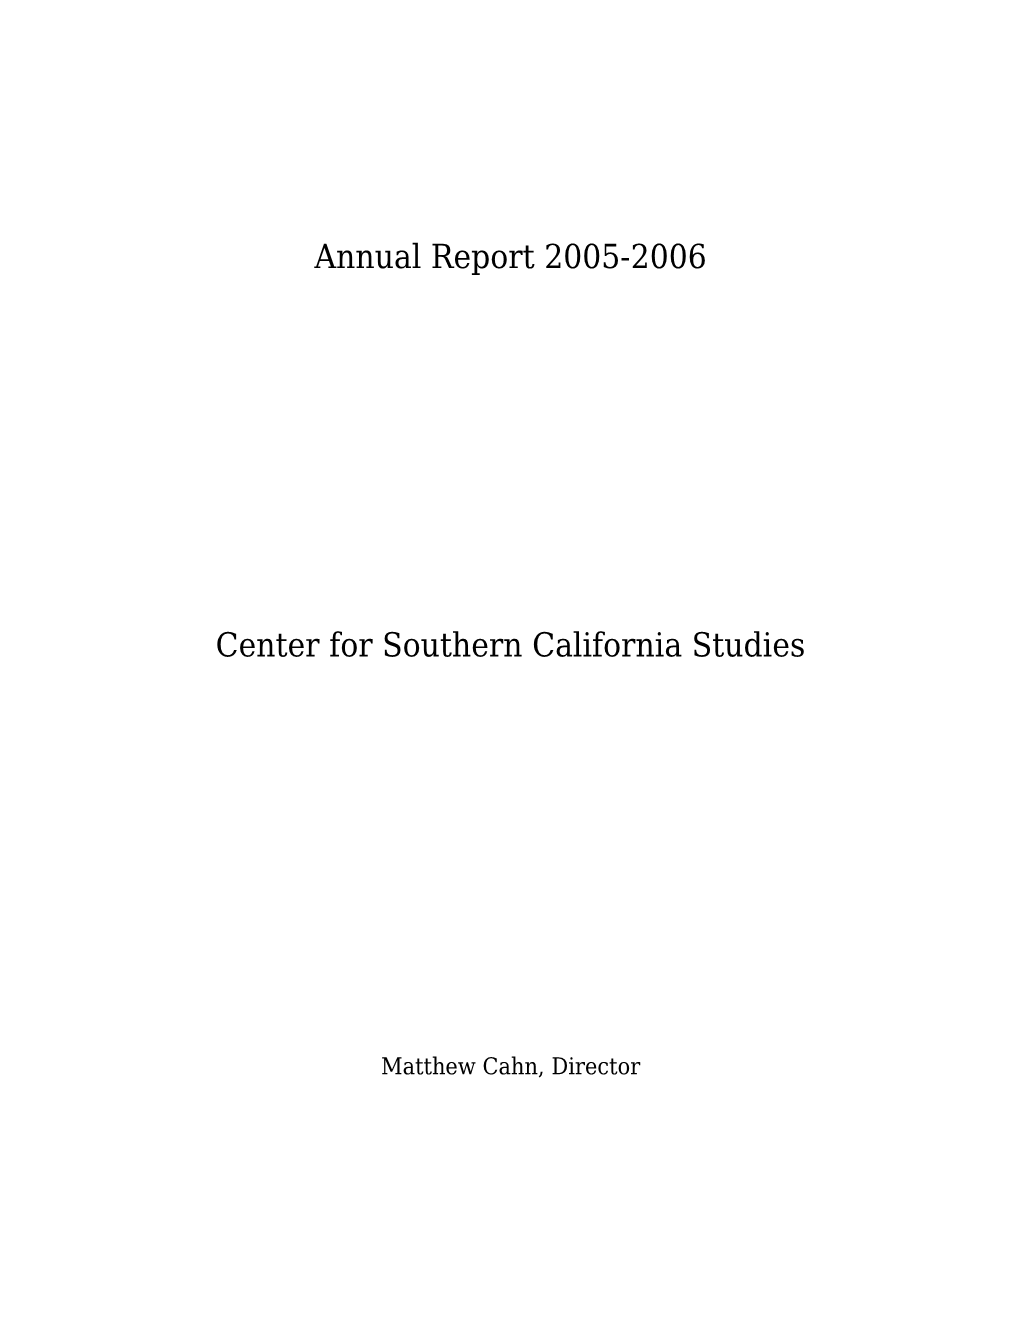 Center for Southern California Studies